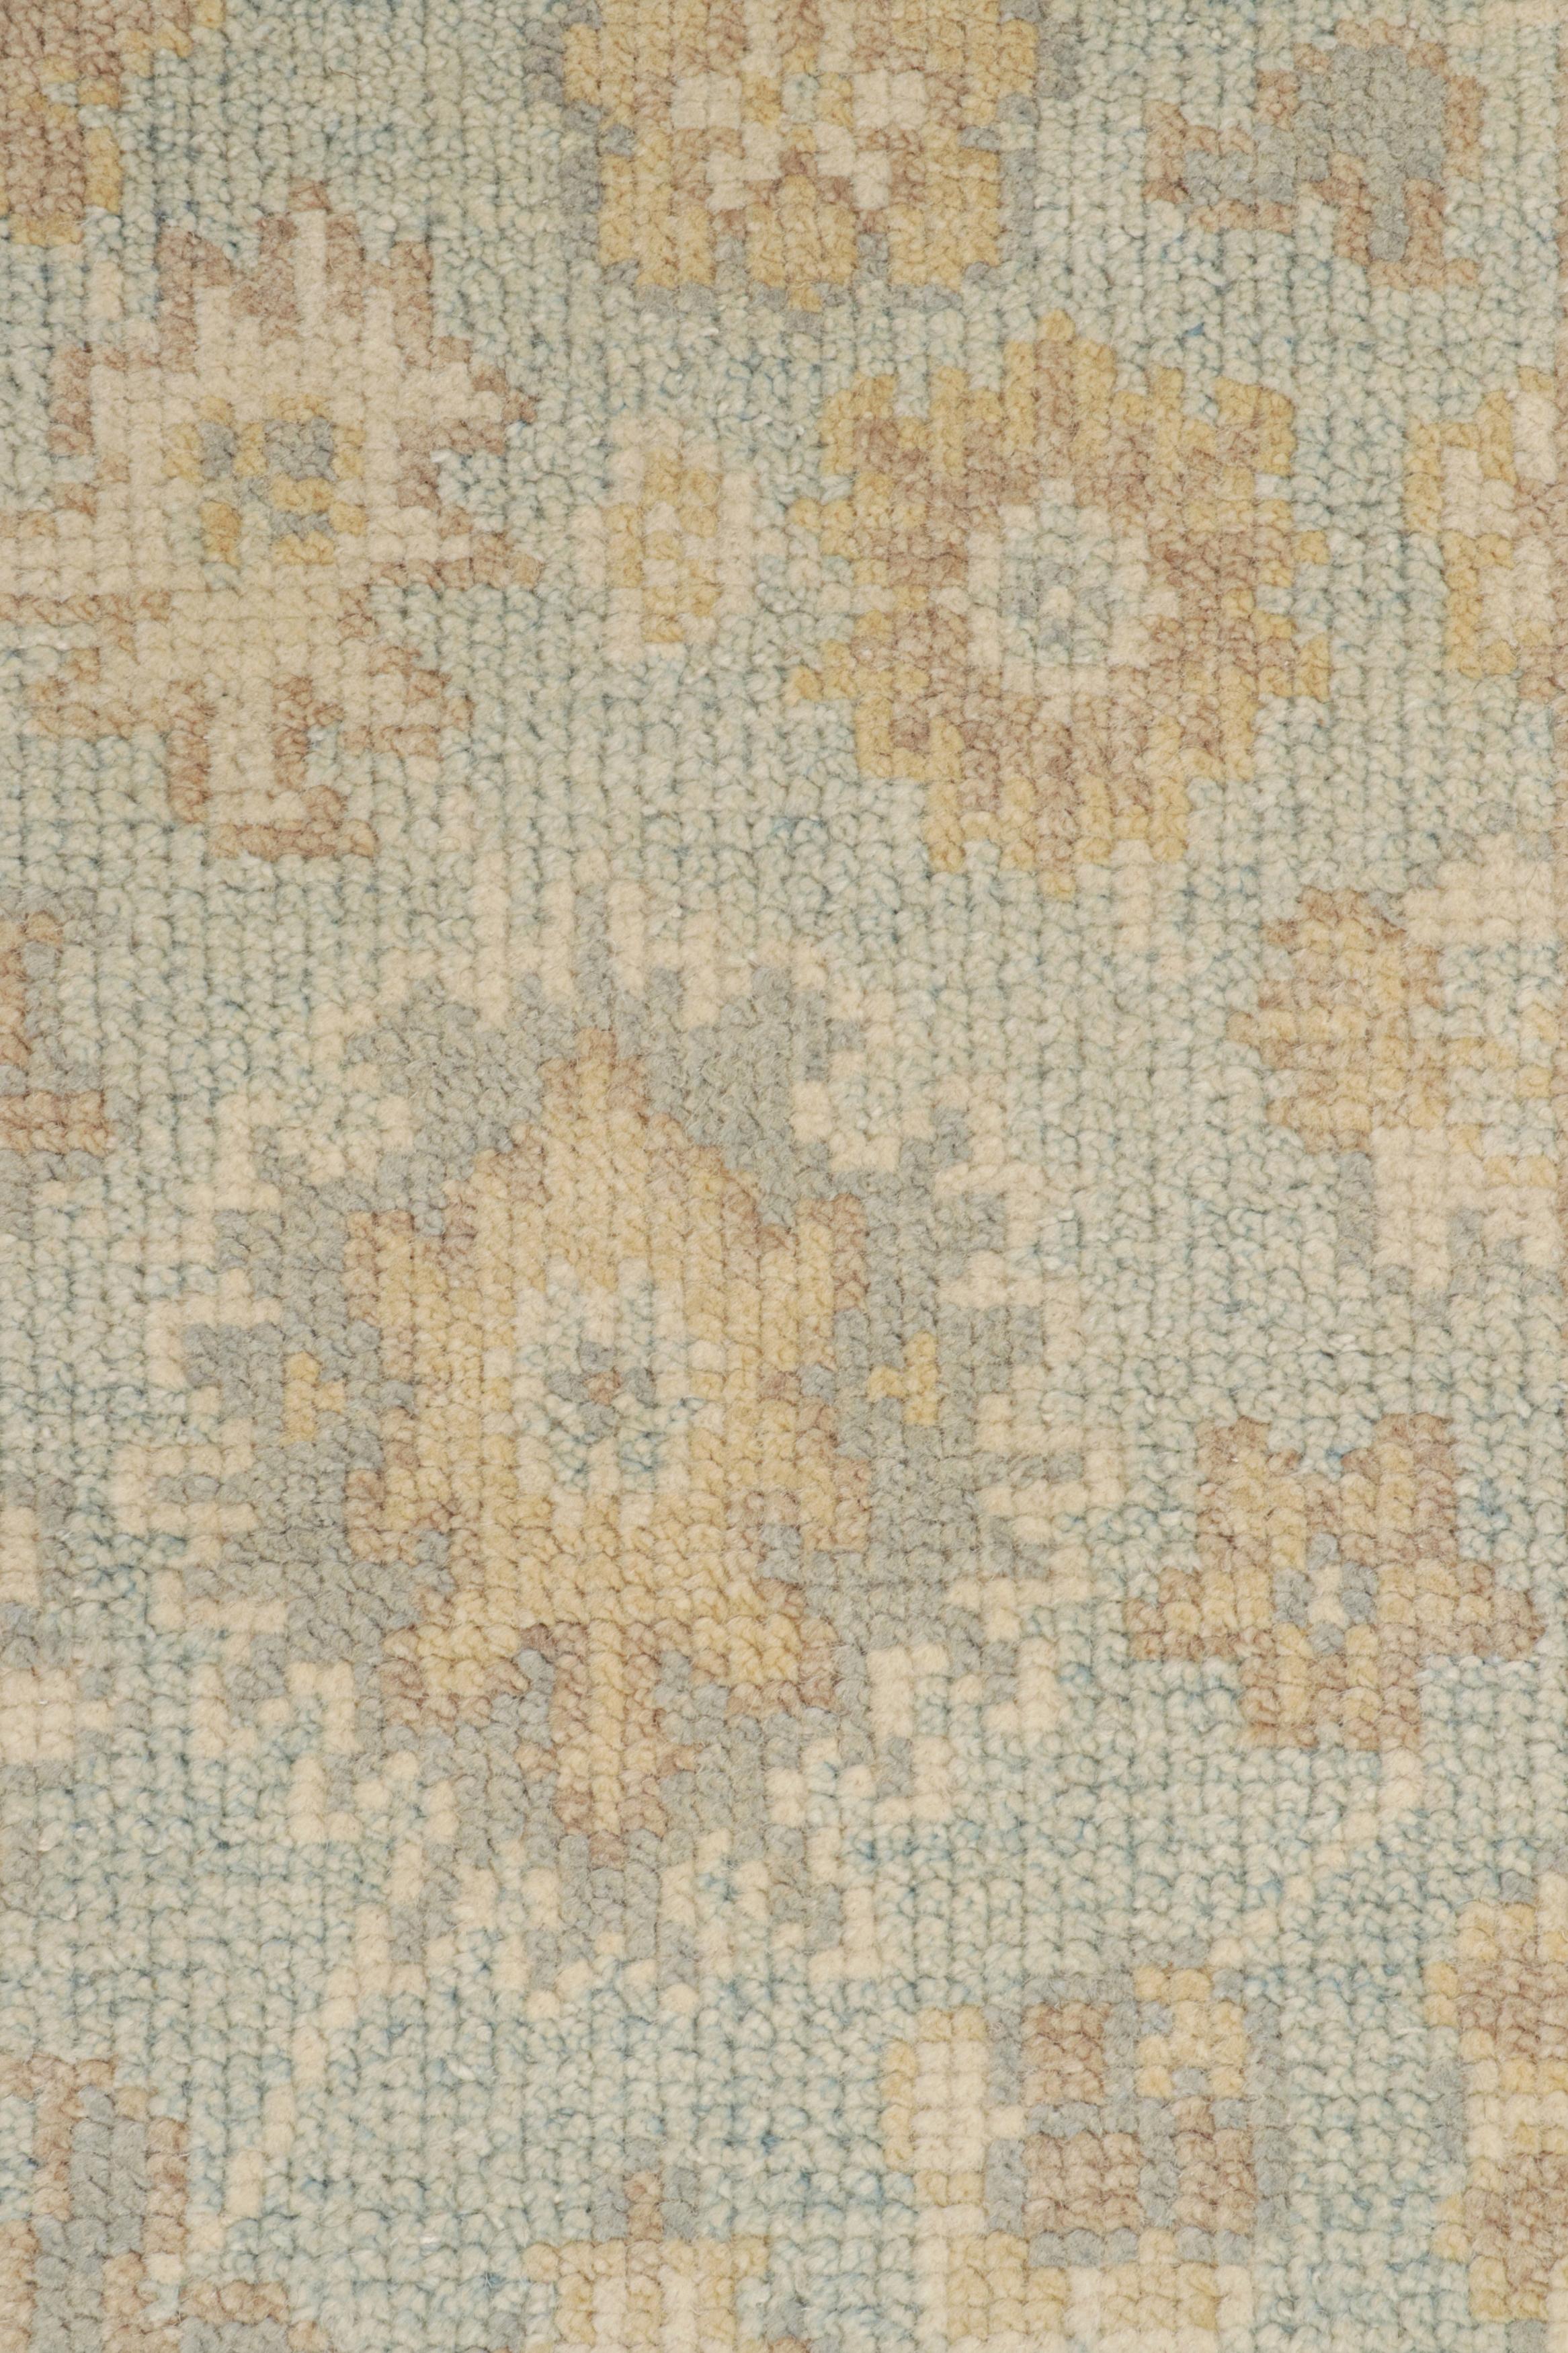 Contemporary Rug & Kilim’s Oushak Style Rug in Blue with Beige-Brown Floral Patterns For Sale